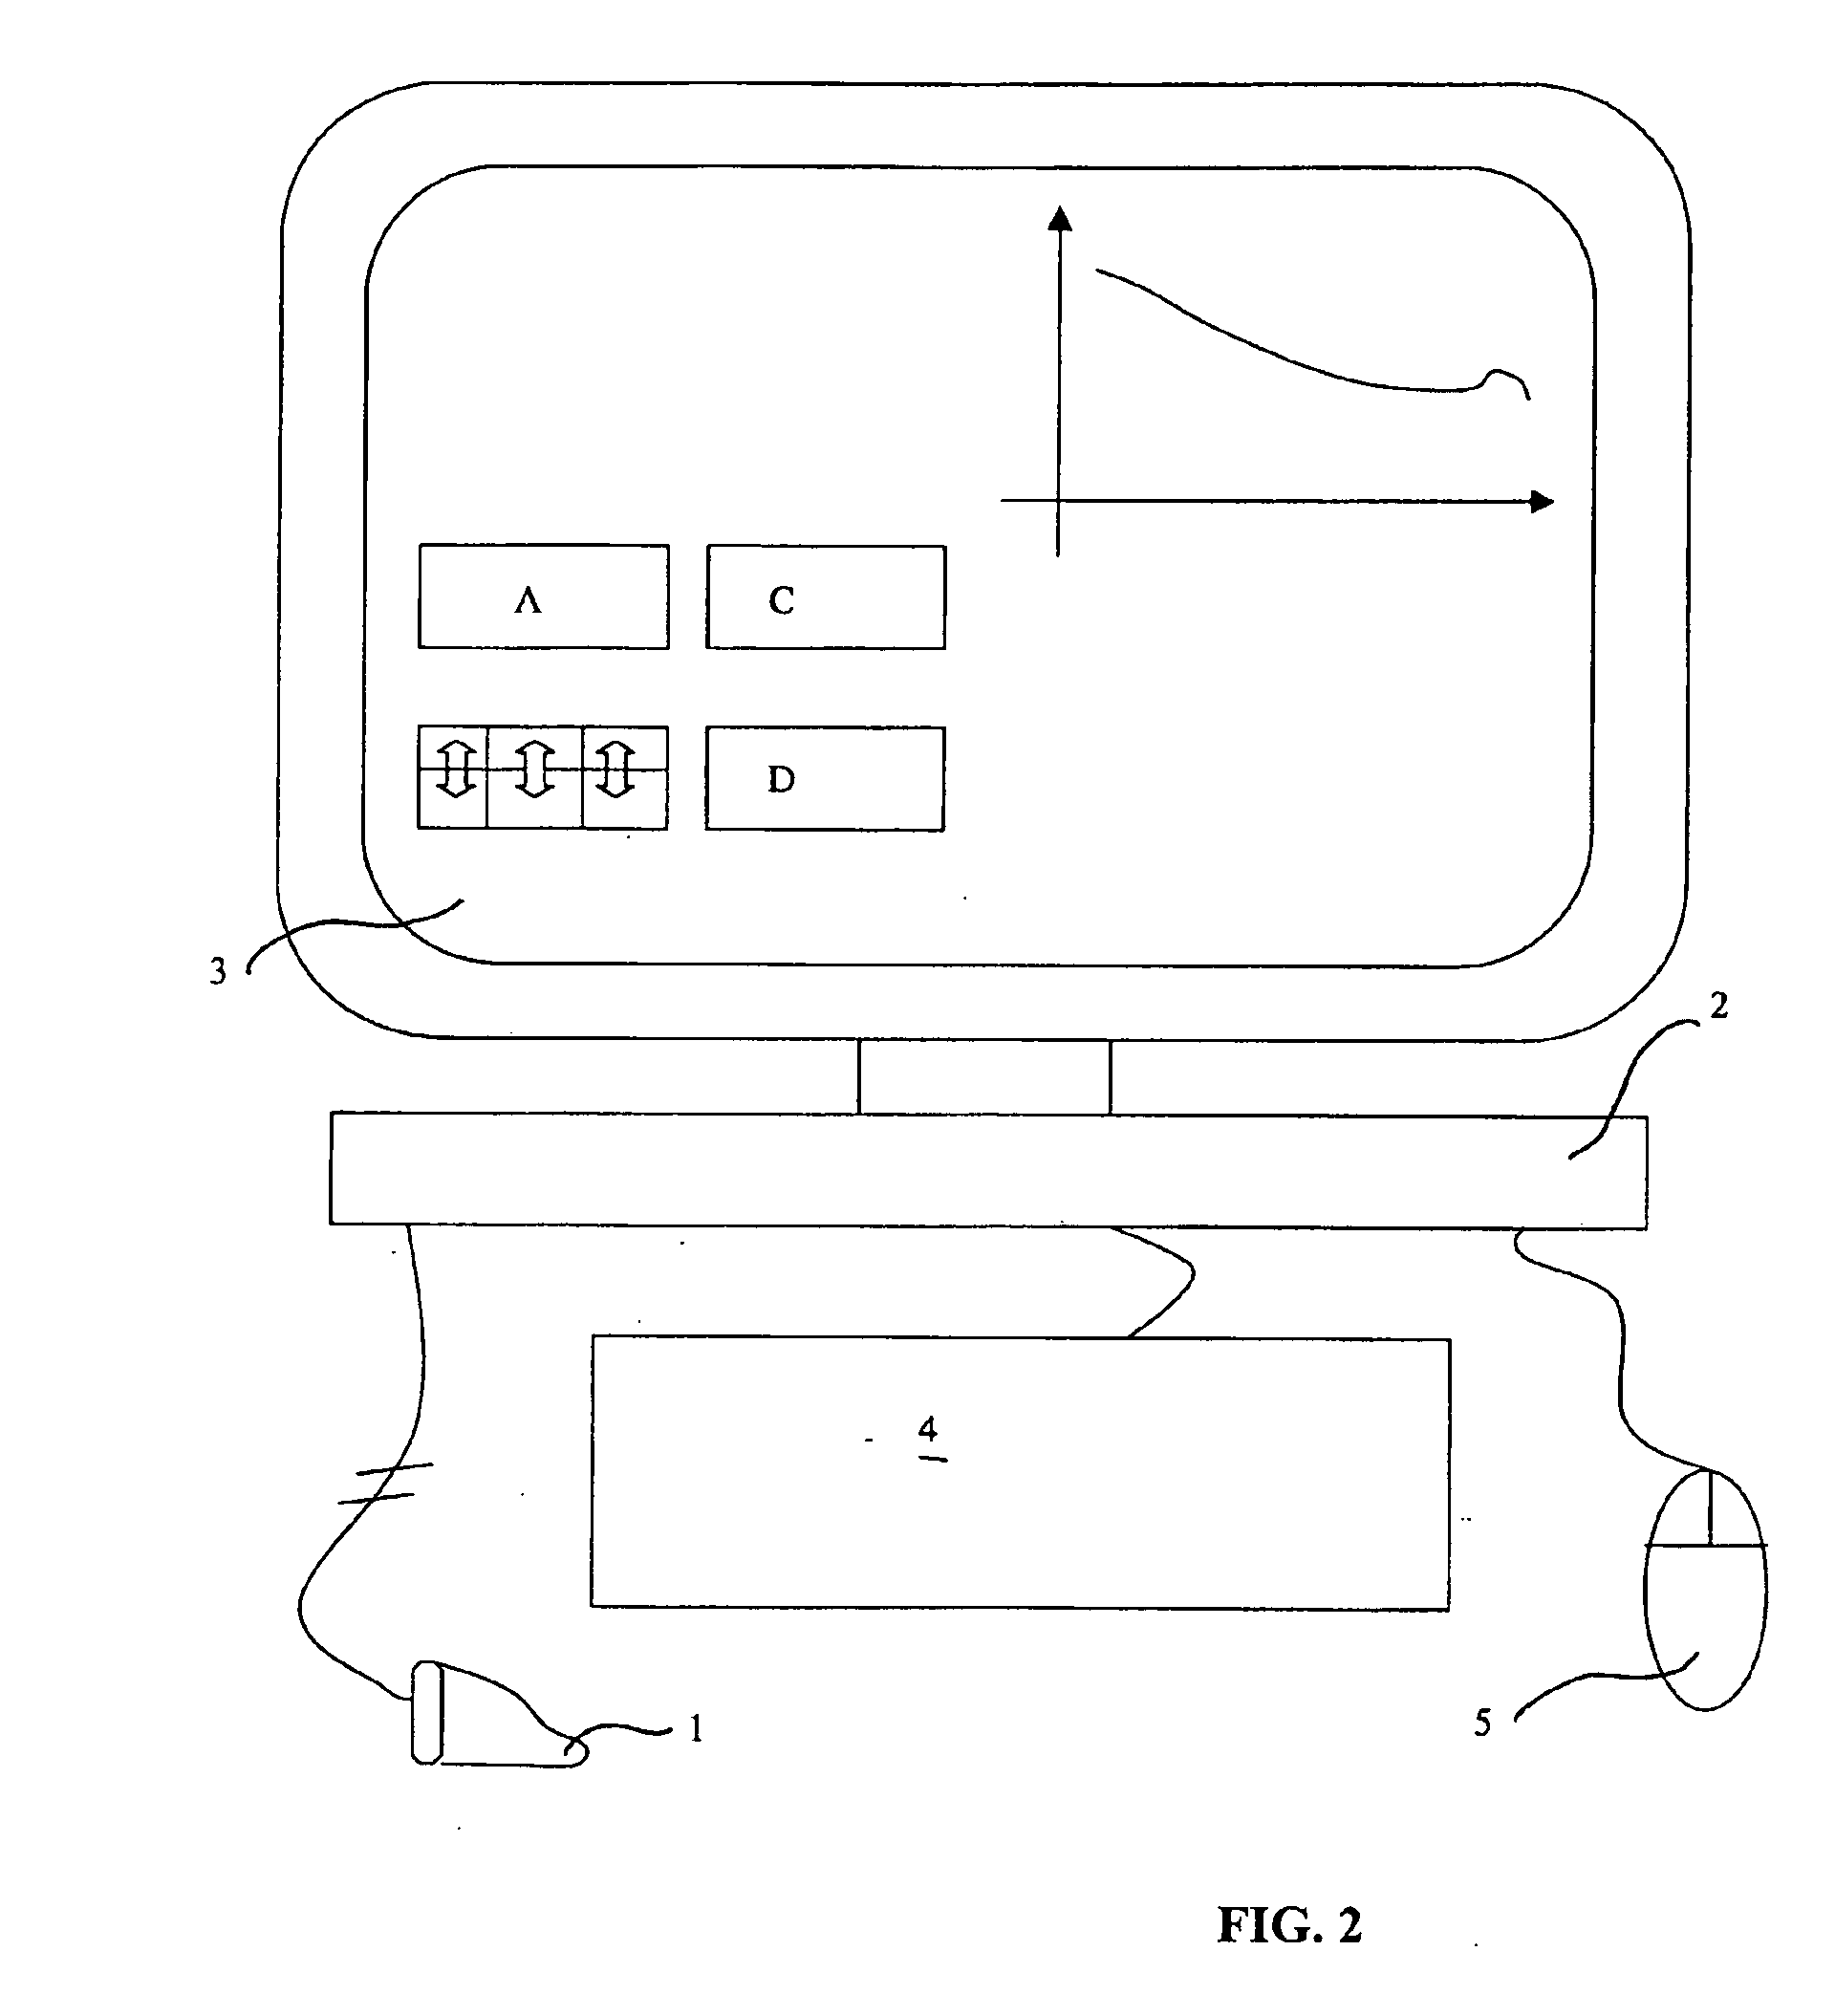 Fitting of parameters in an electronic device